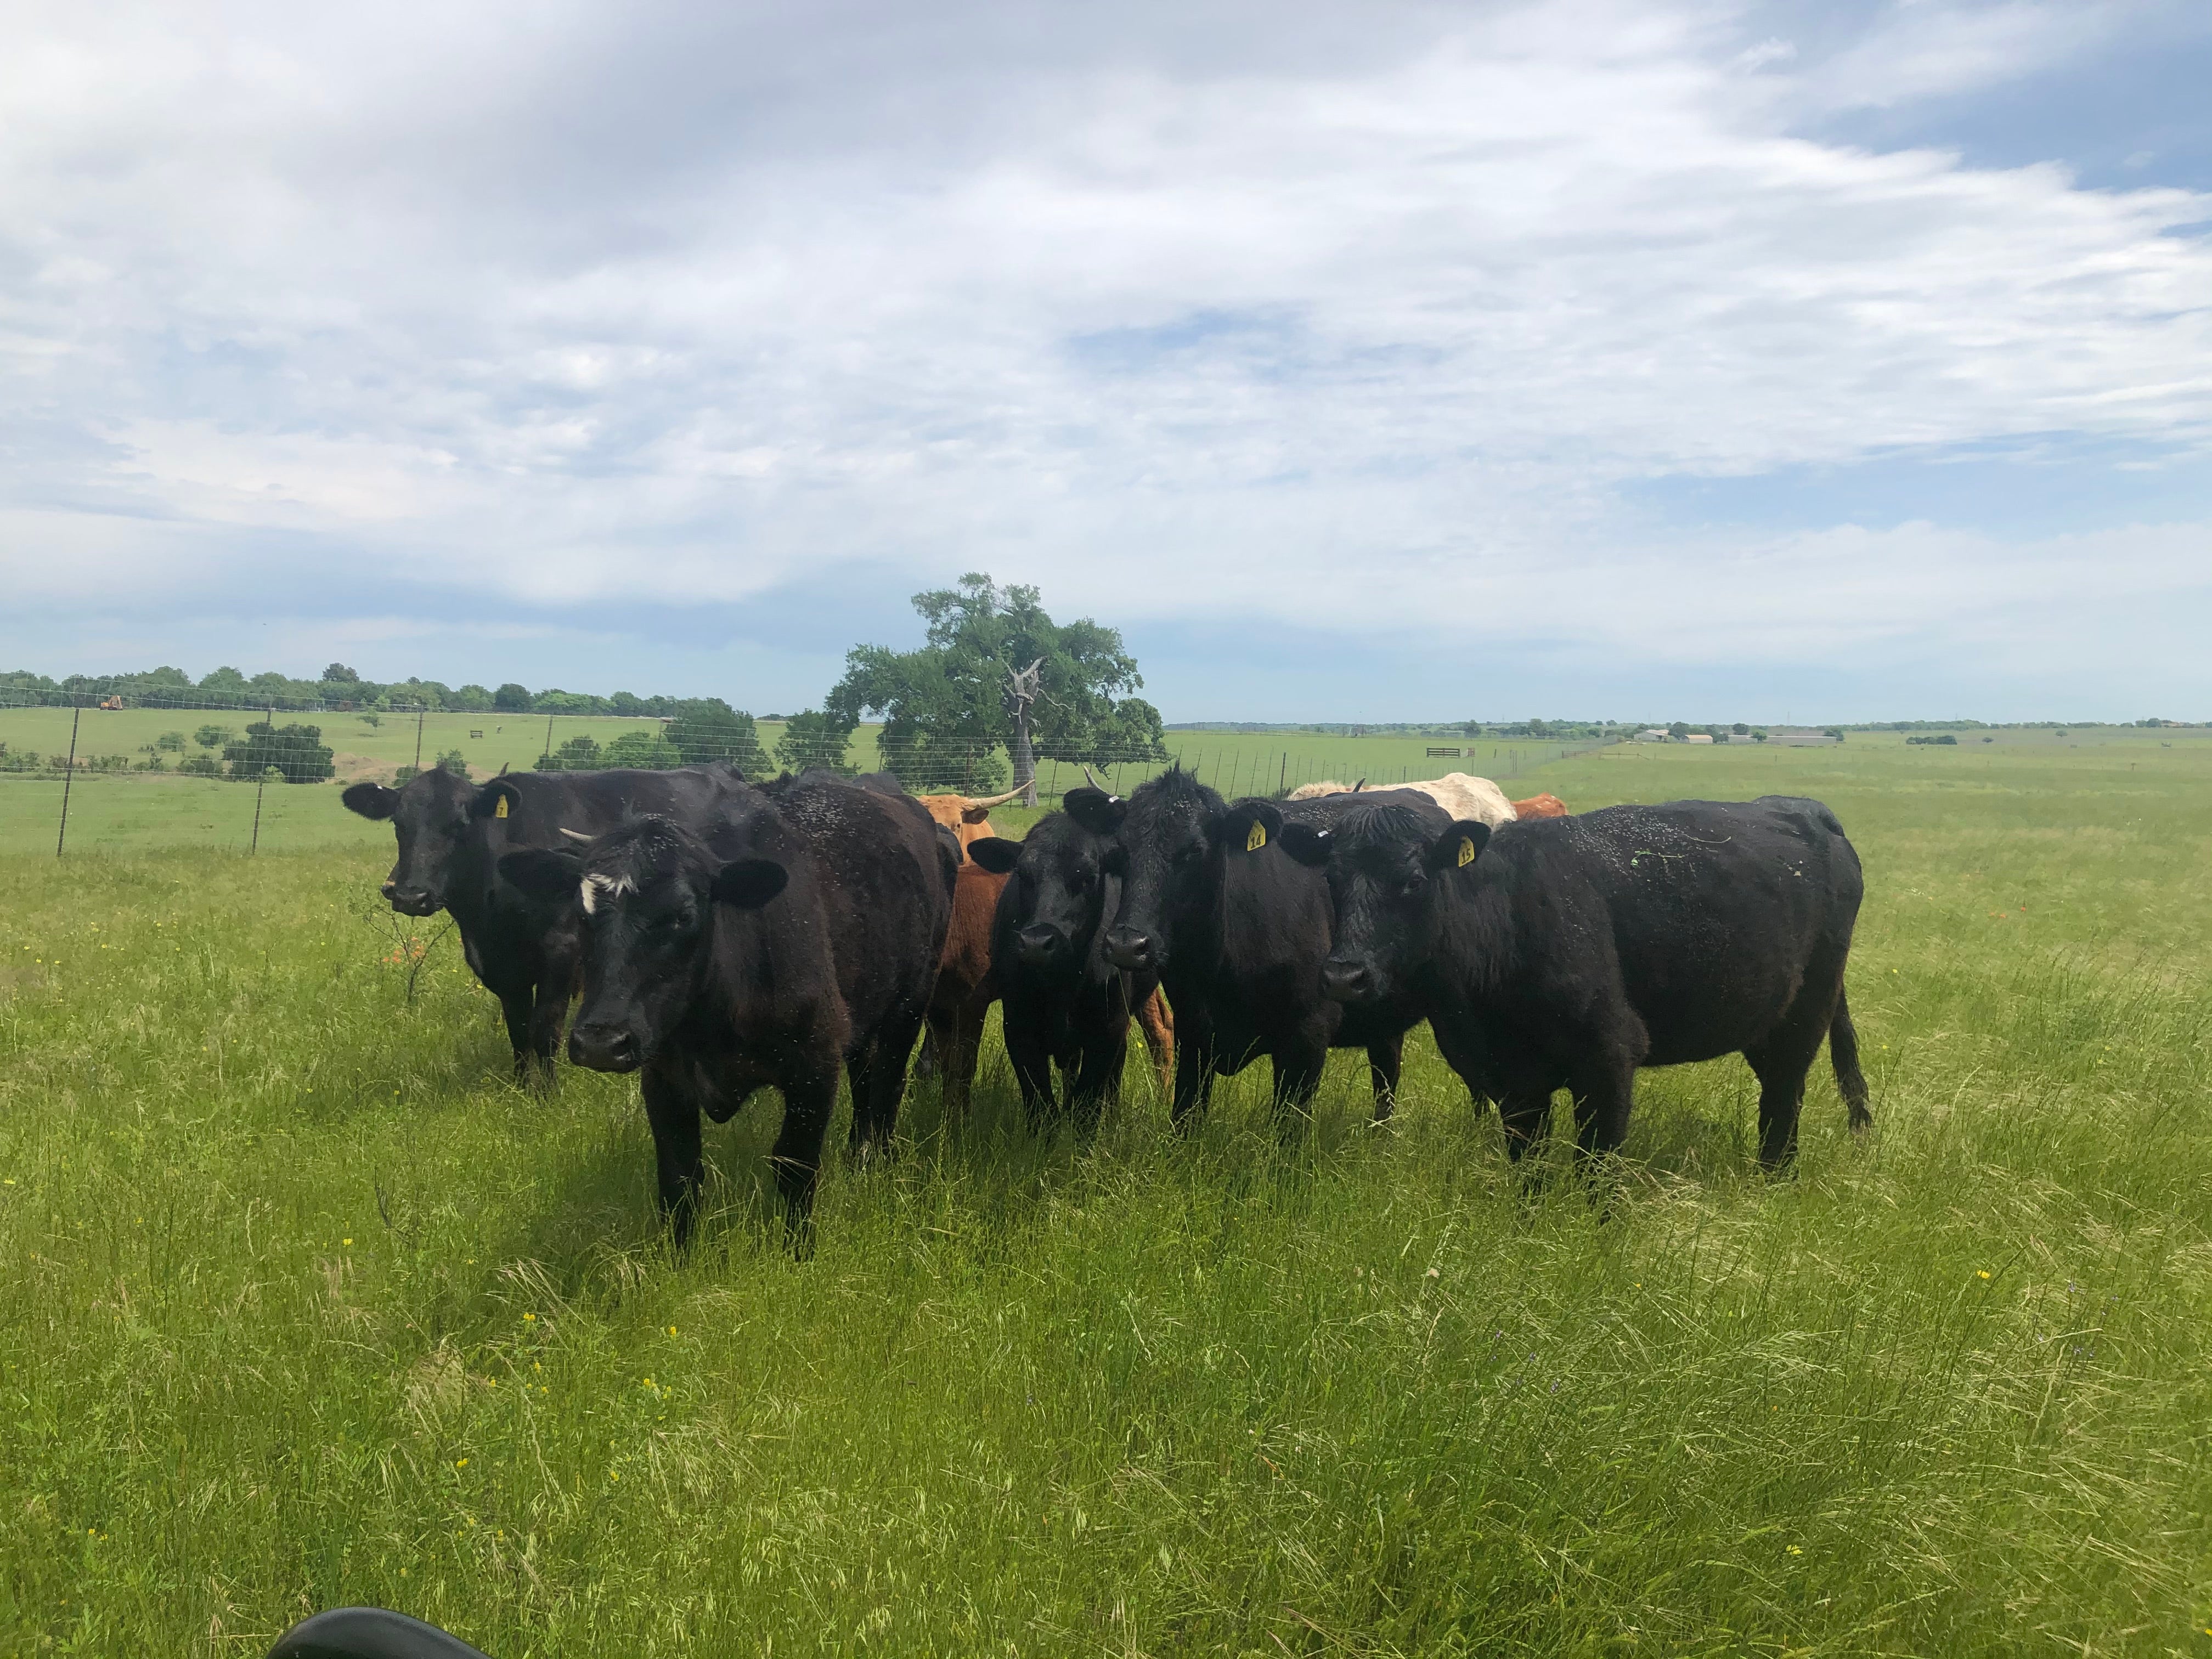 Rep. Jodey Arrington: Memorial Day weekend – US beef is not a climate villain. Let's support our ranchers